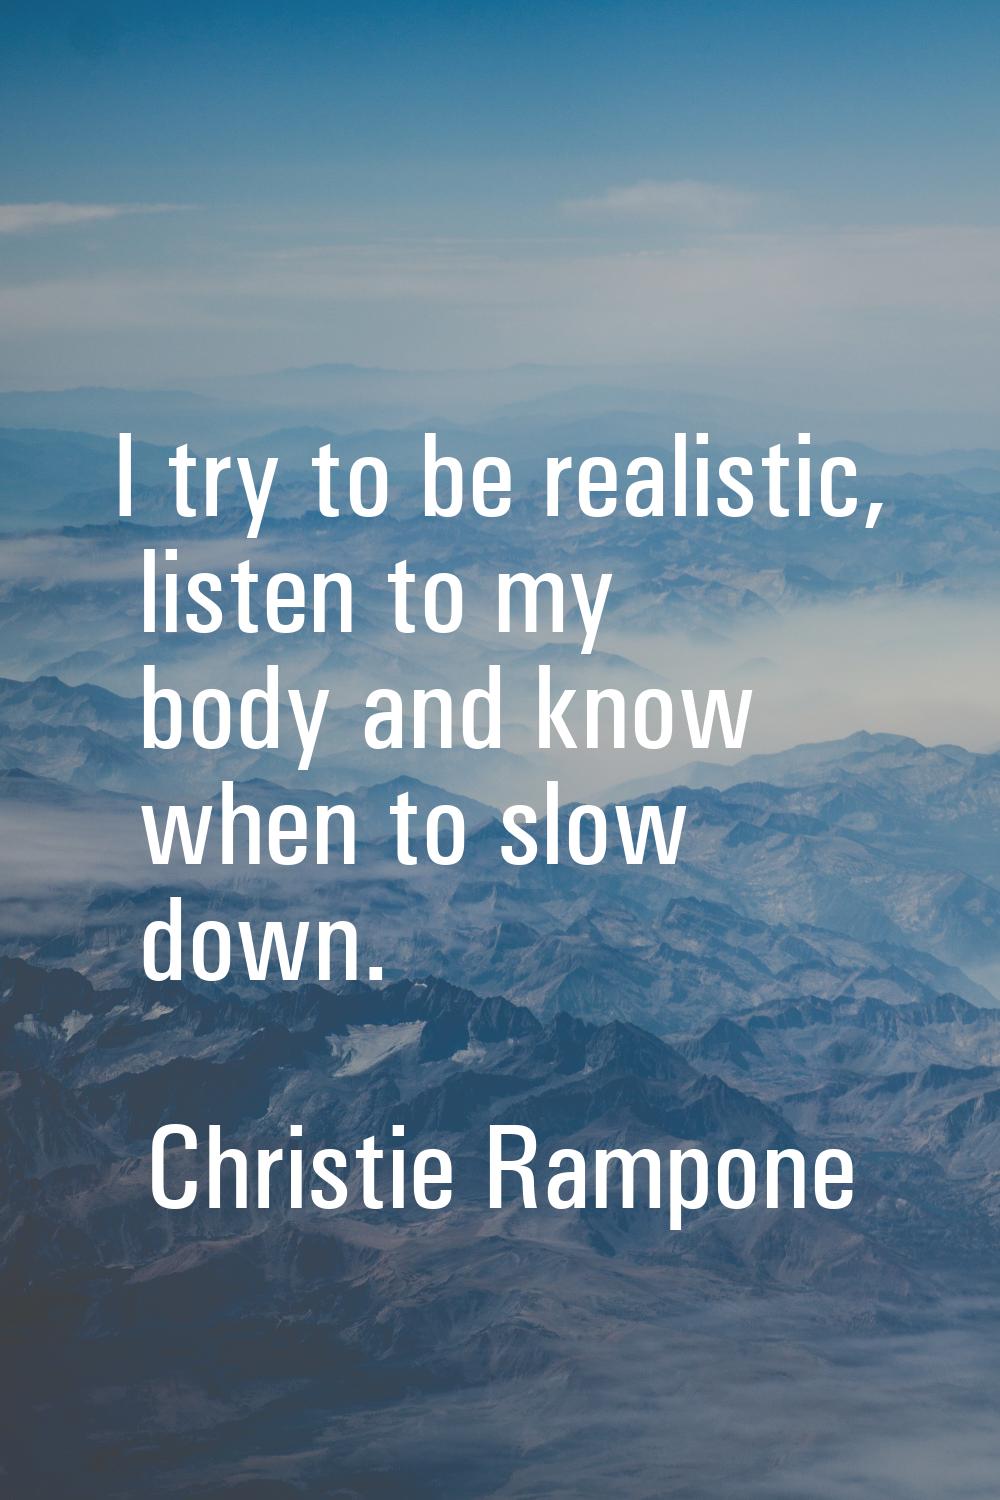 I try to be realistic, listen to my body and know when to slow down.